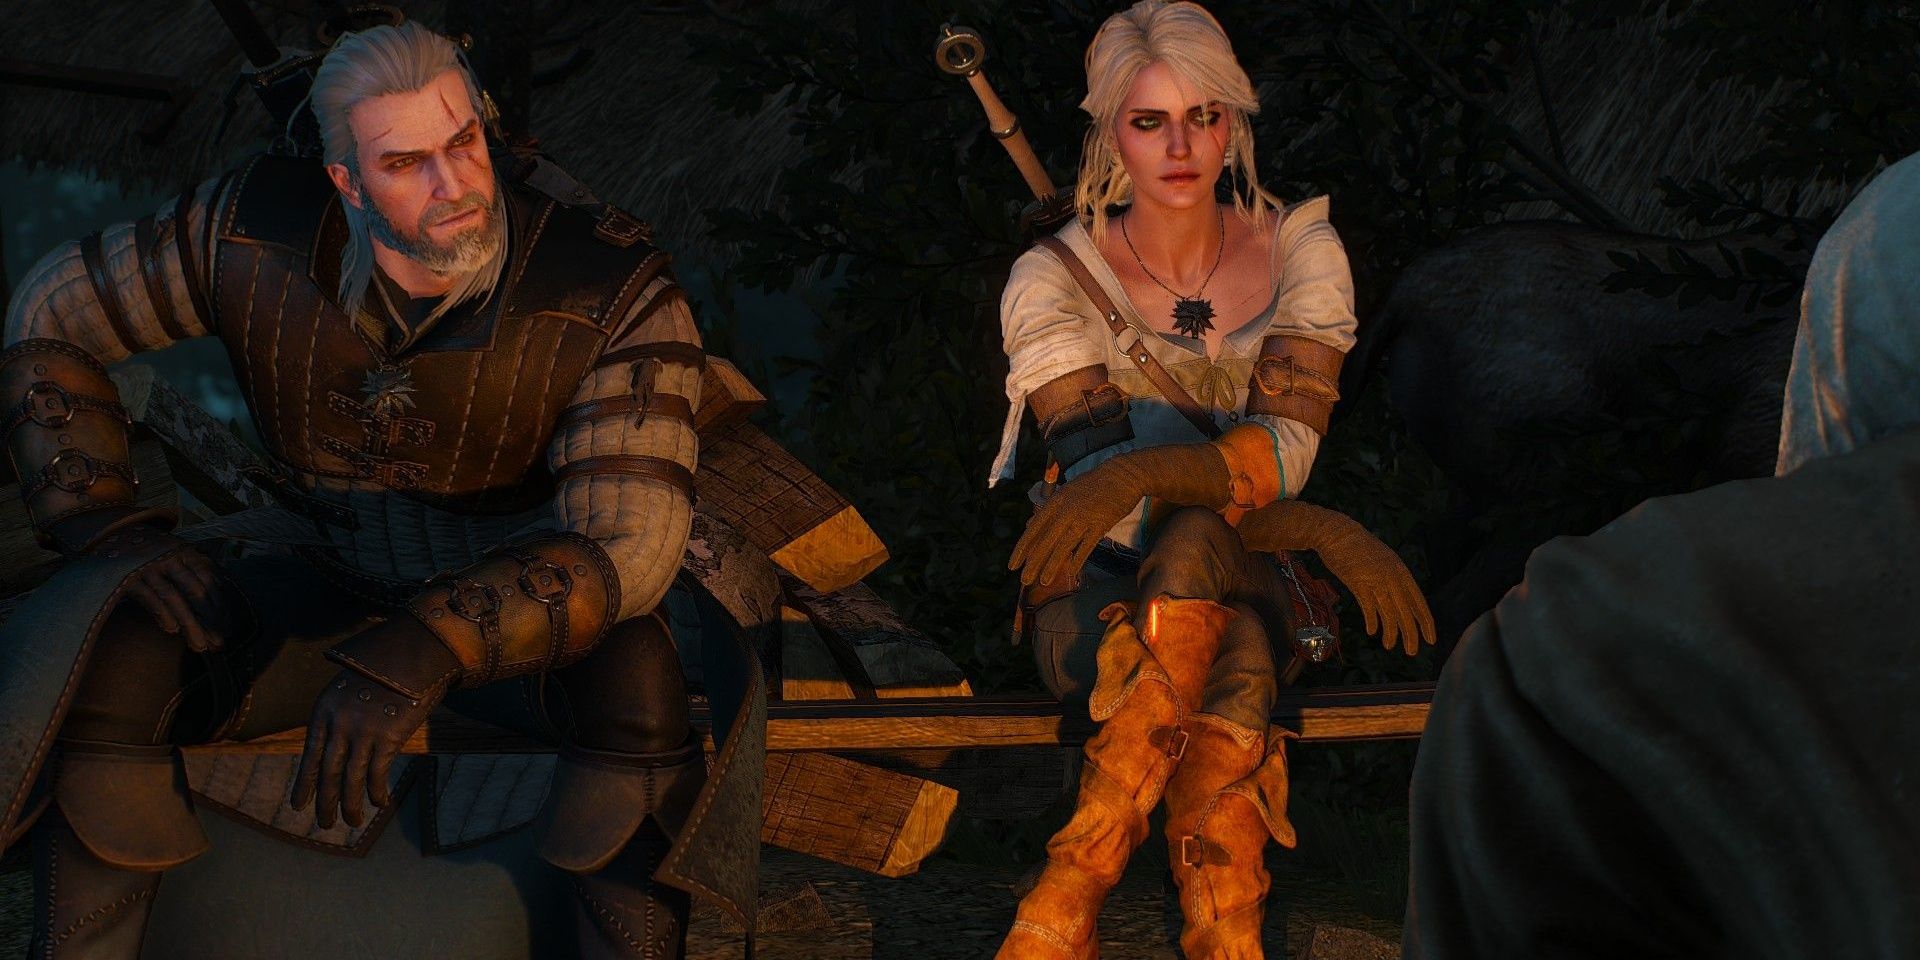 The Witcher Ciri Geralt feature Geralt and Ciri sit by the fire